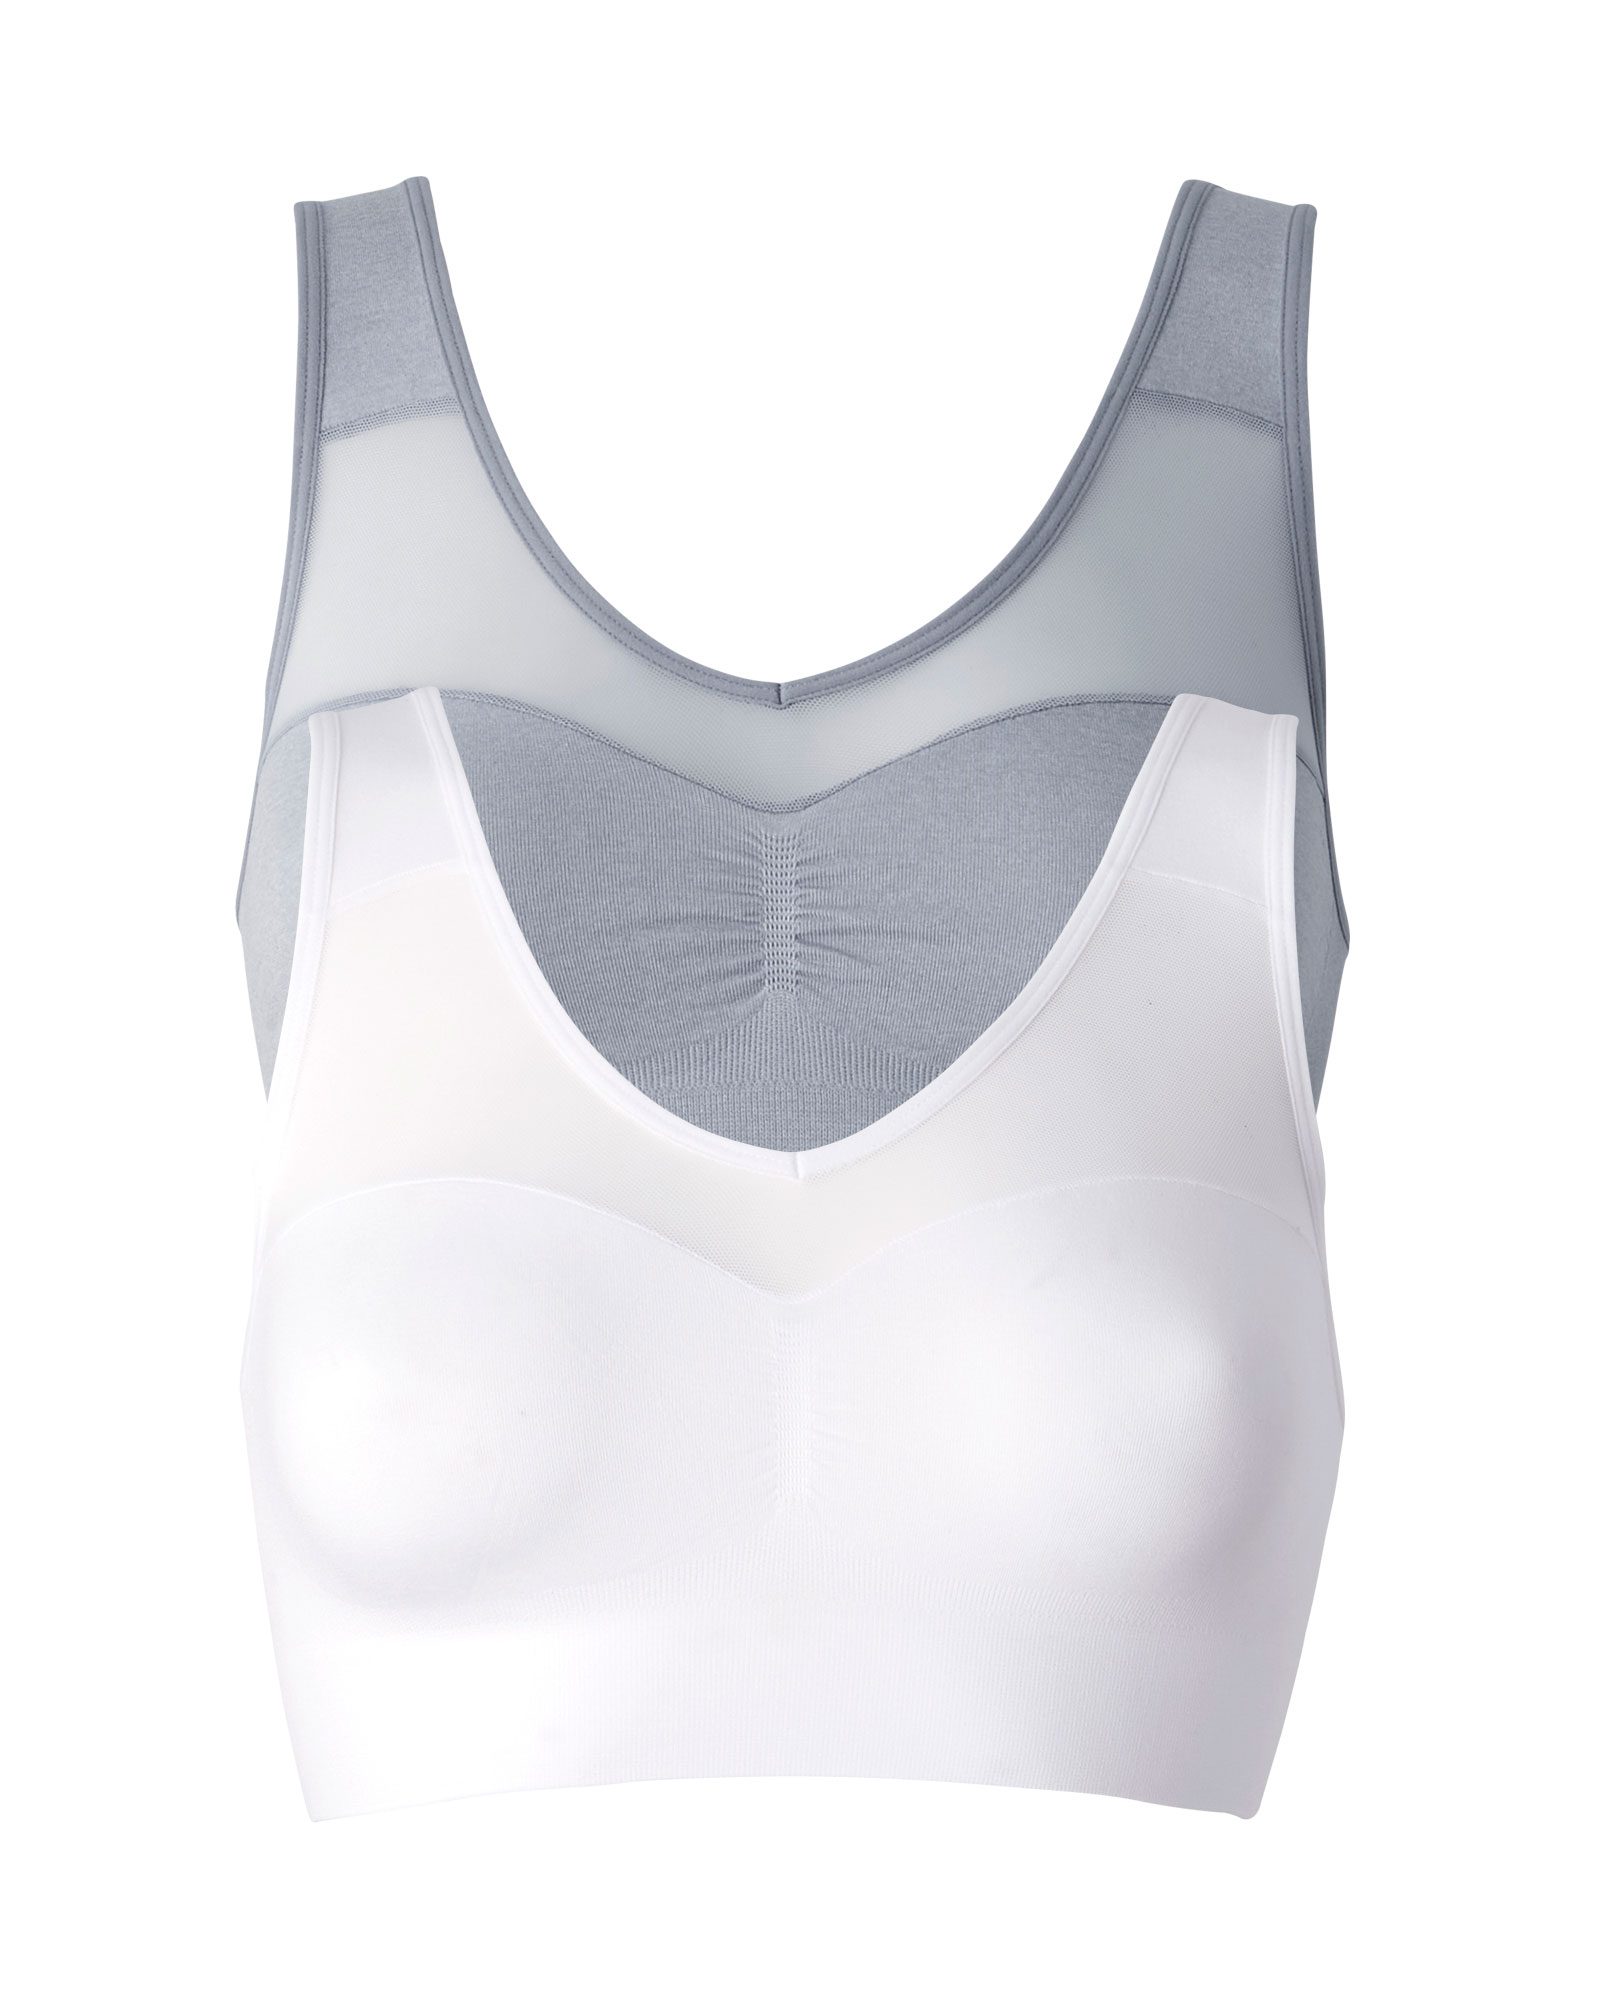 Buy Triswi's White Pure Cotton Bra for Hot and Humid Indian